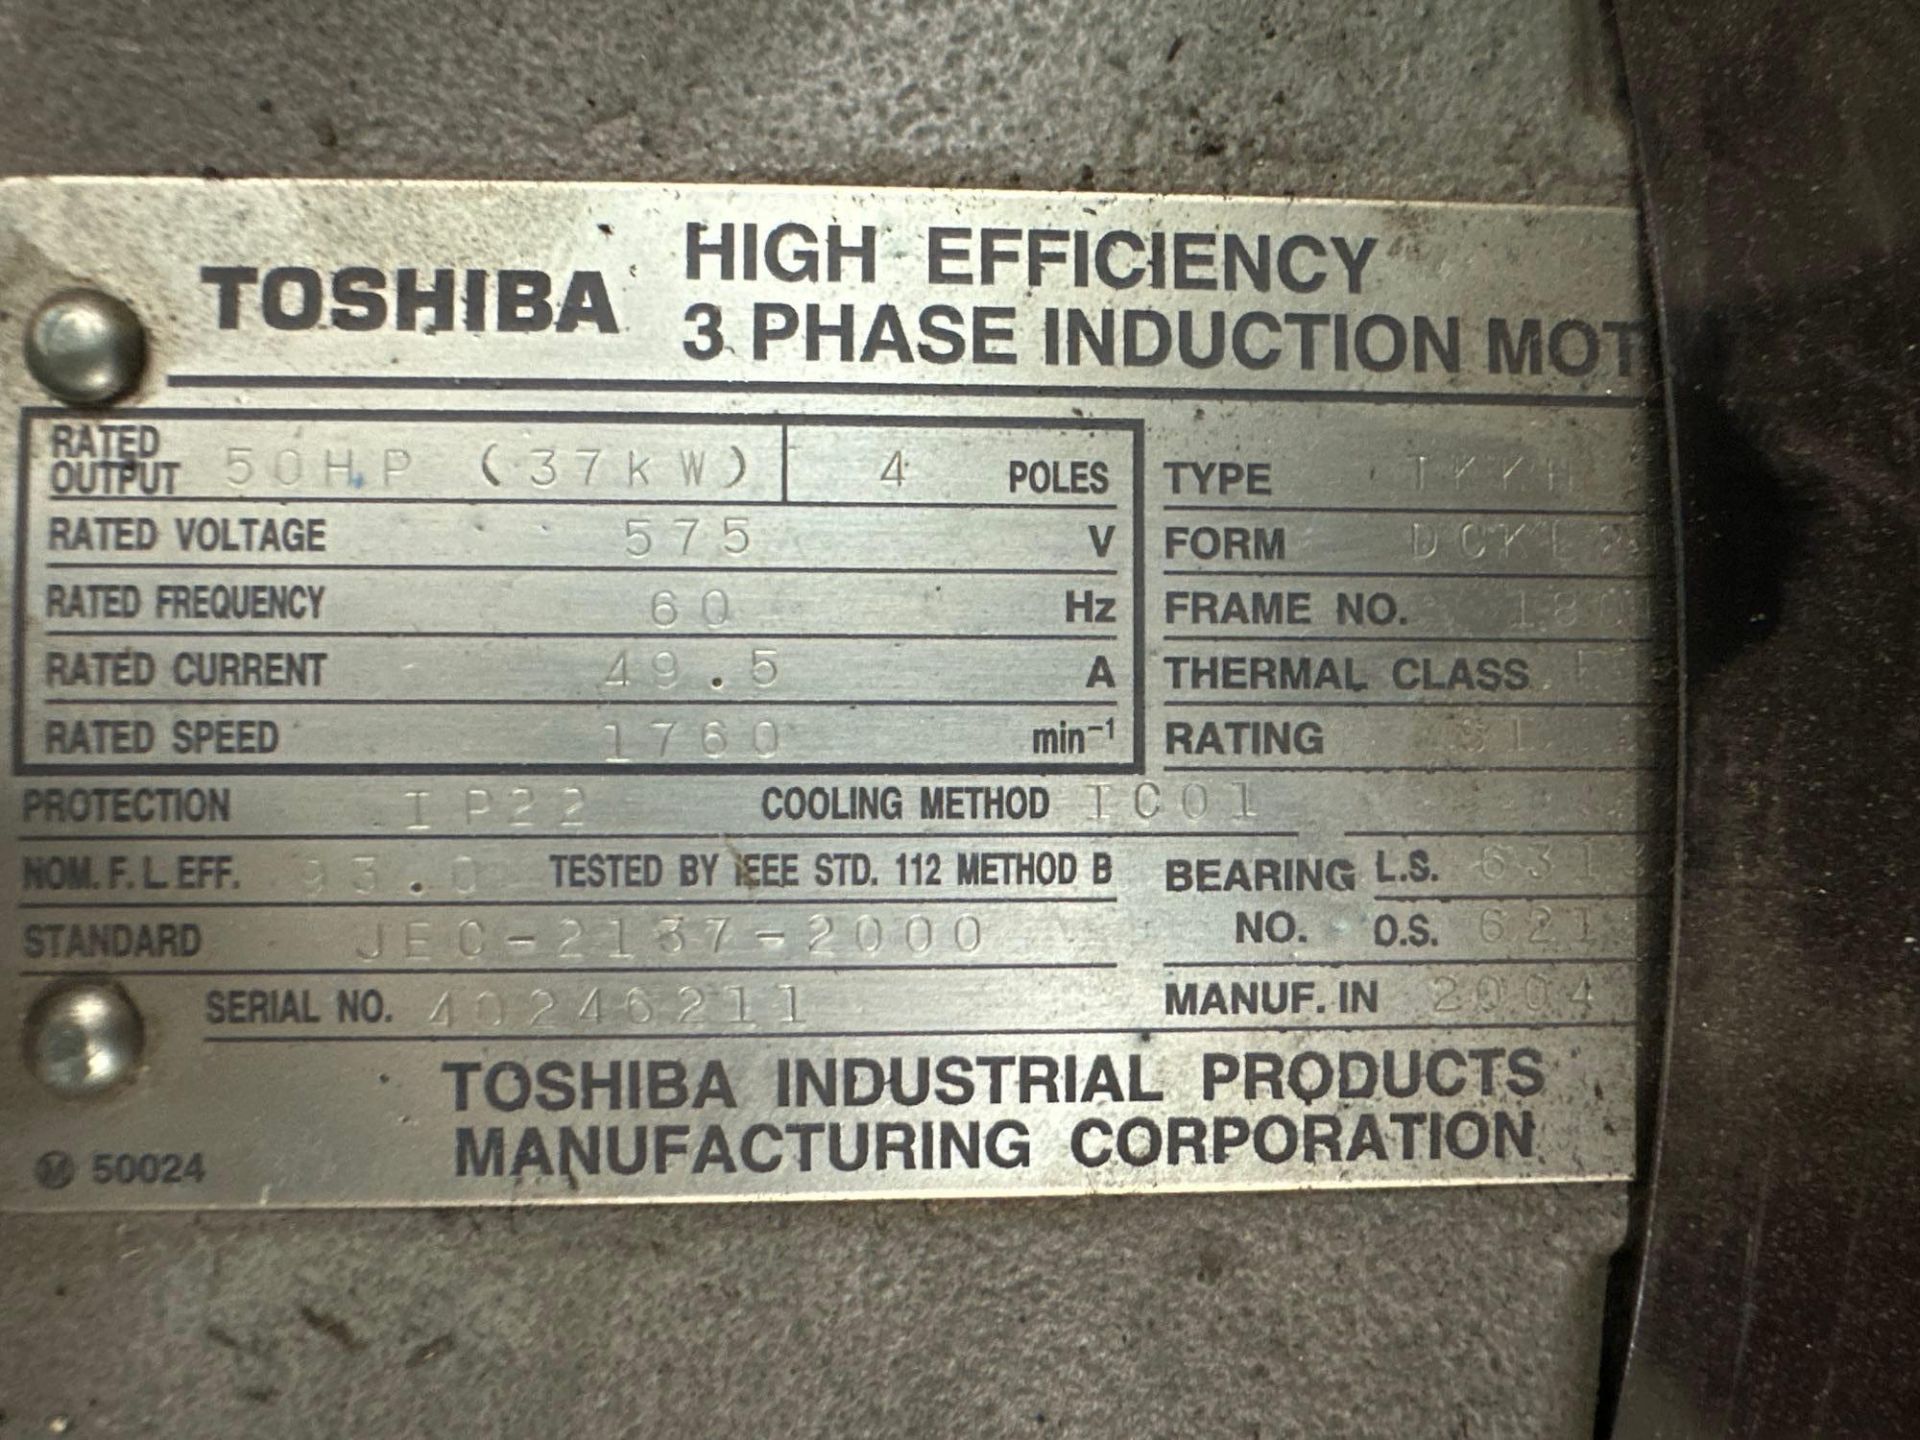 Toshiba High Efficiency 3 Phase Induction Motor, 50hp, s/n 40246211 - Image 6 of 6